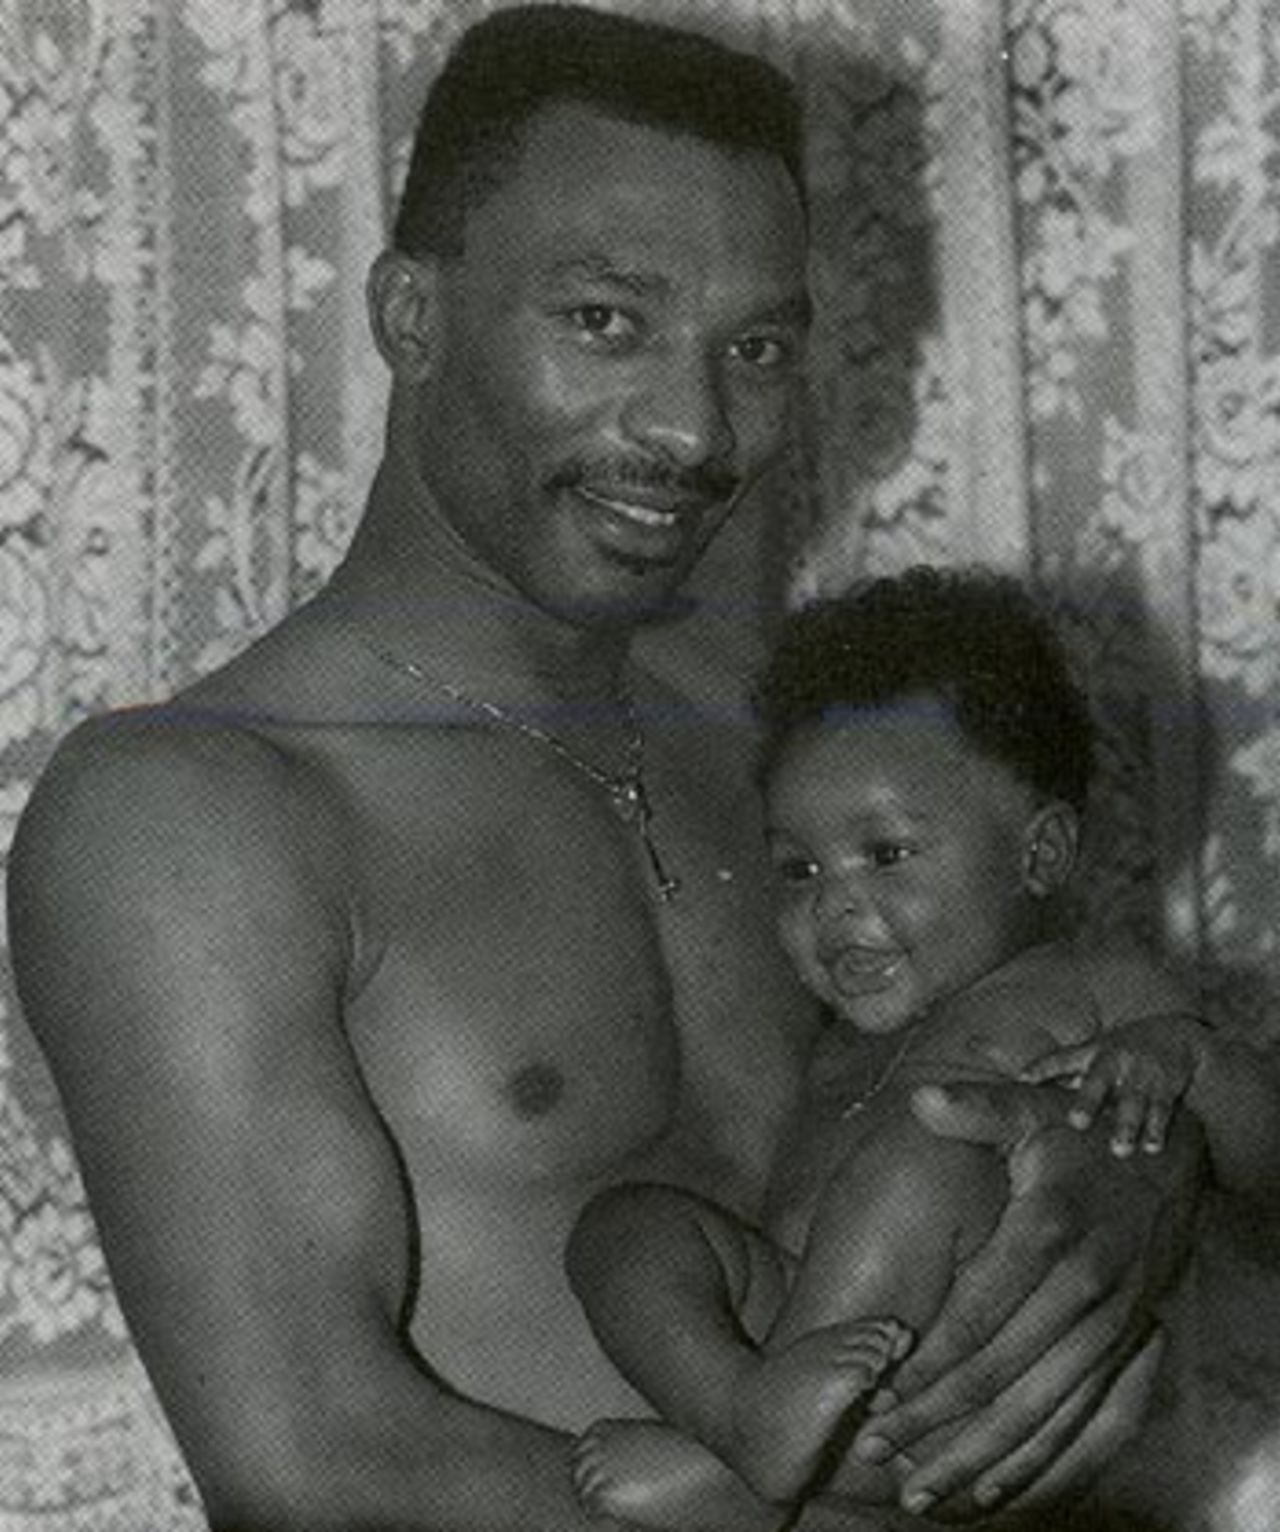 Neil Williams holds his son, Beresford